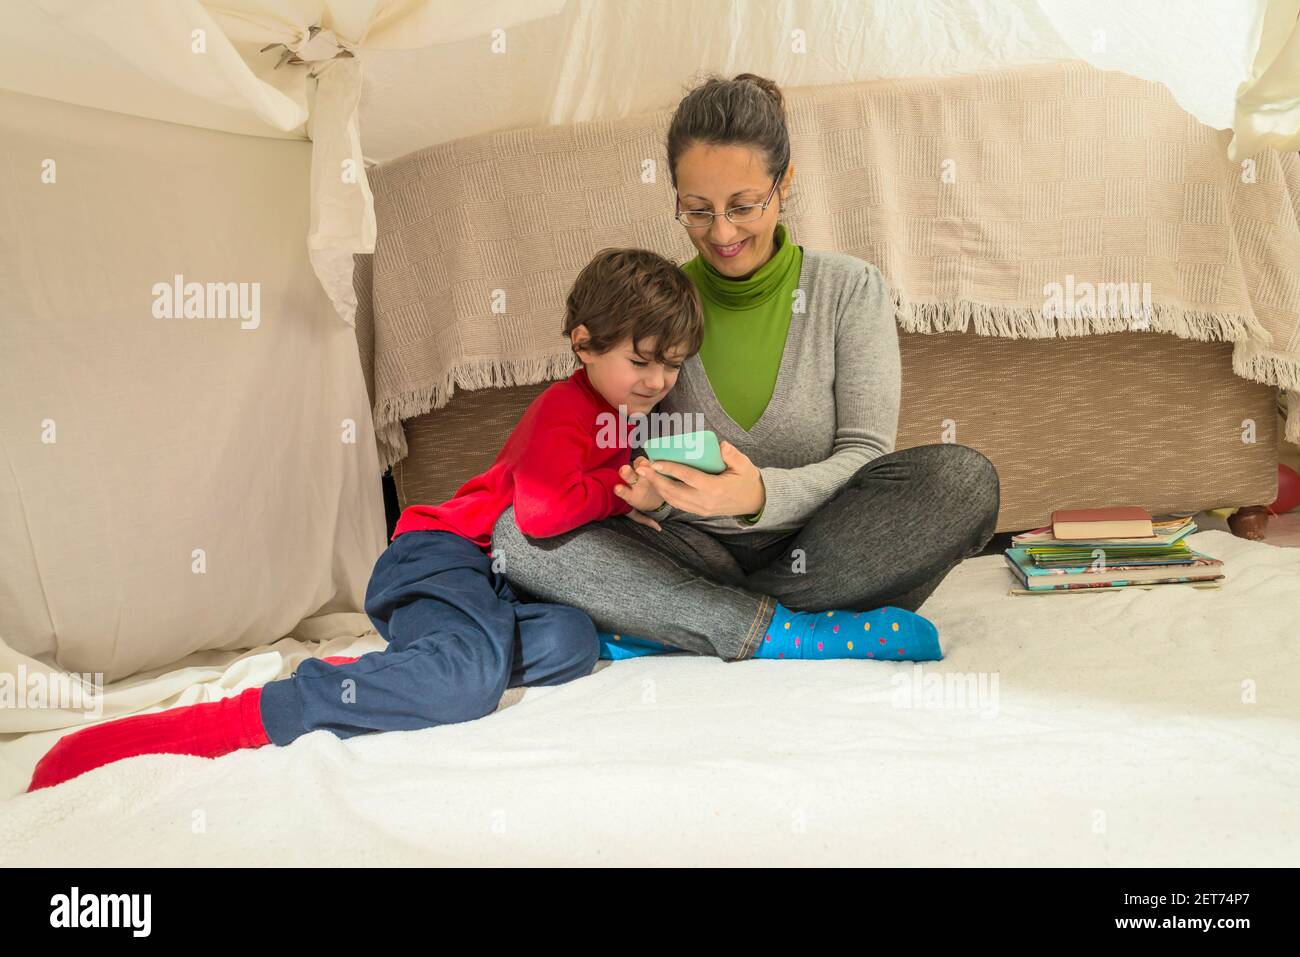 A woman and a child looking at a smart phone sitting on a blanket in a makeshift tent in the living room at home. Home lifestyle concept. Stock Photo